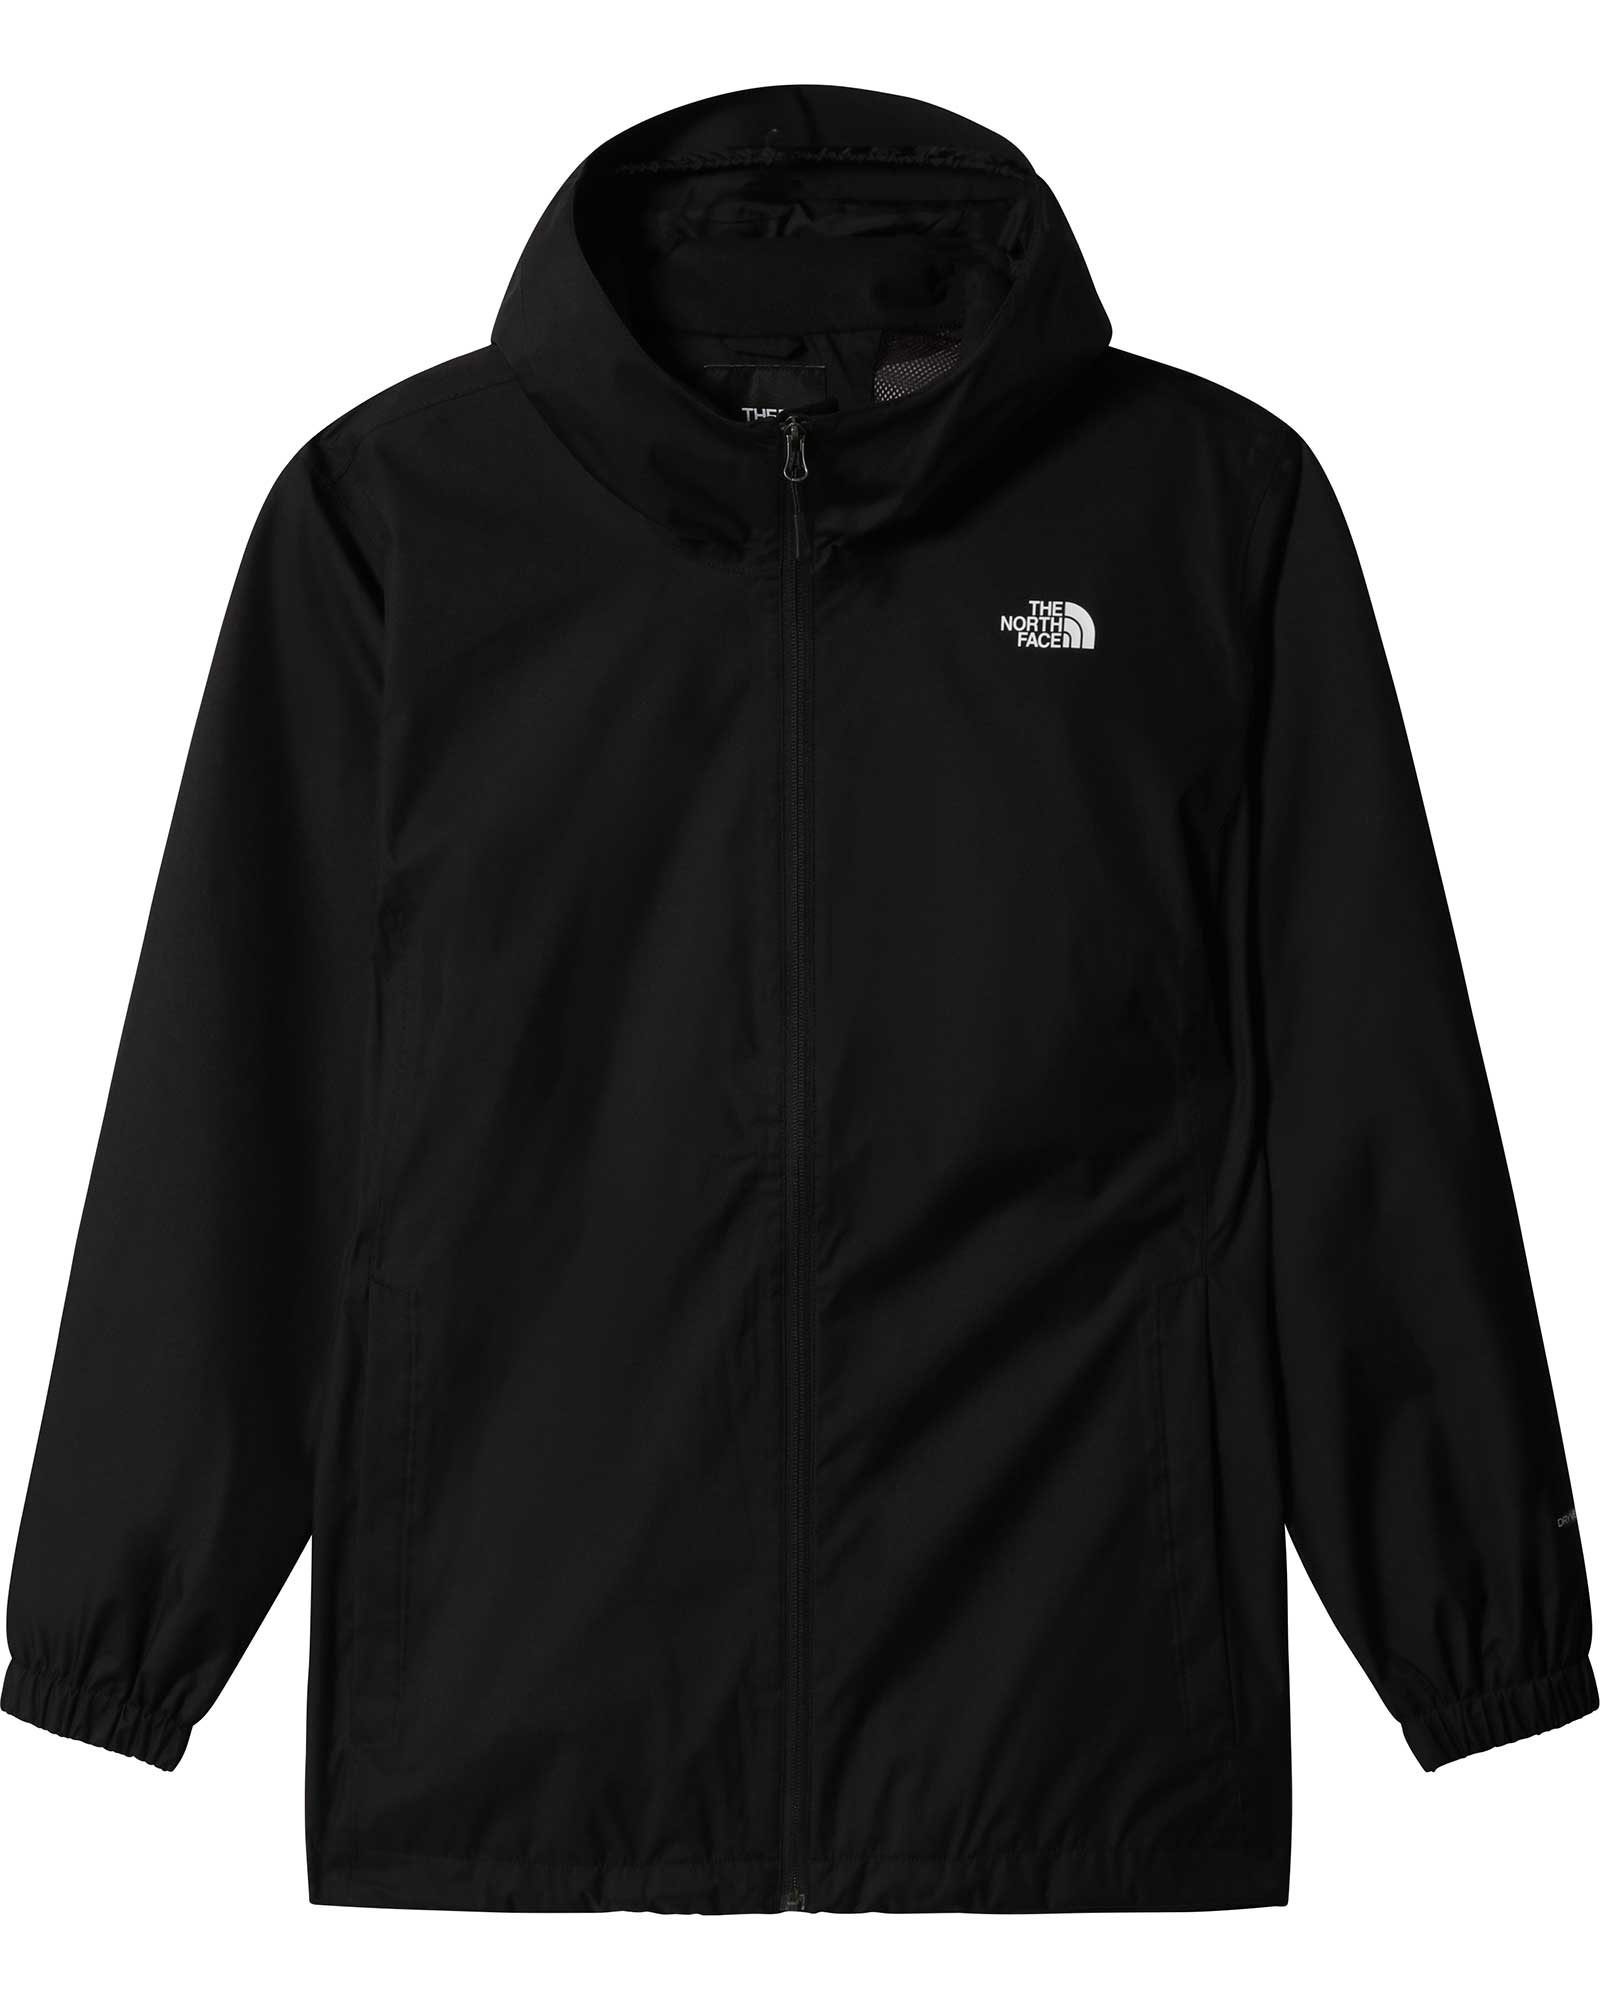 The North Face Quest Plus Womens Jacket